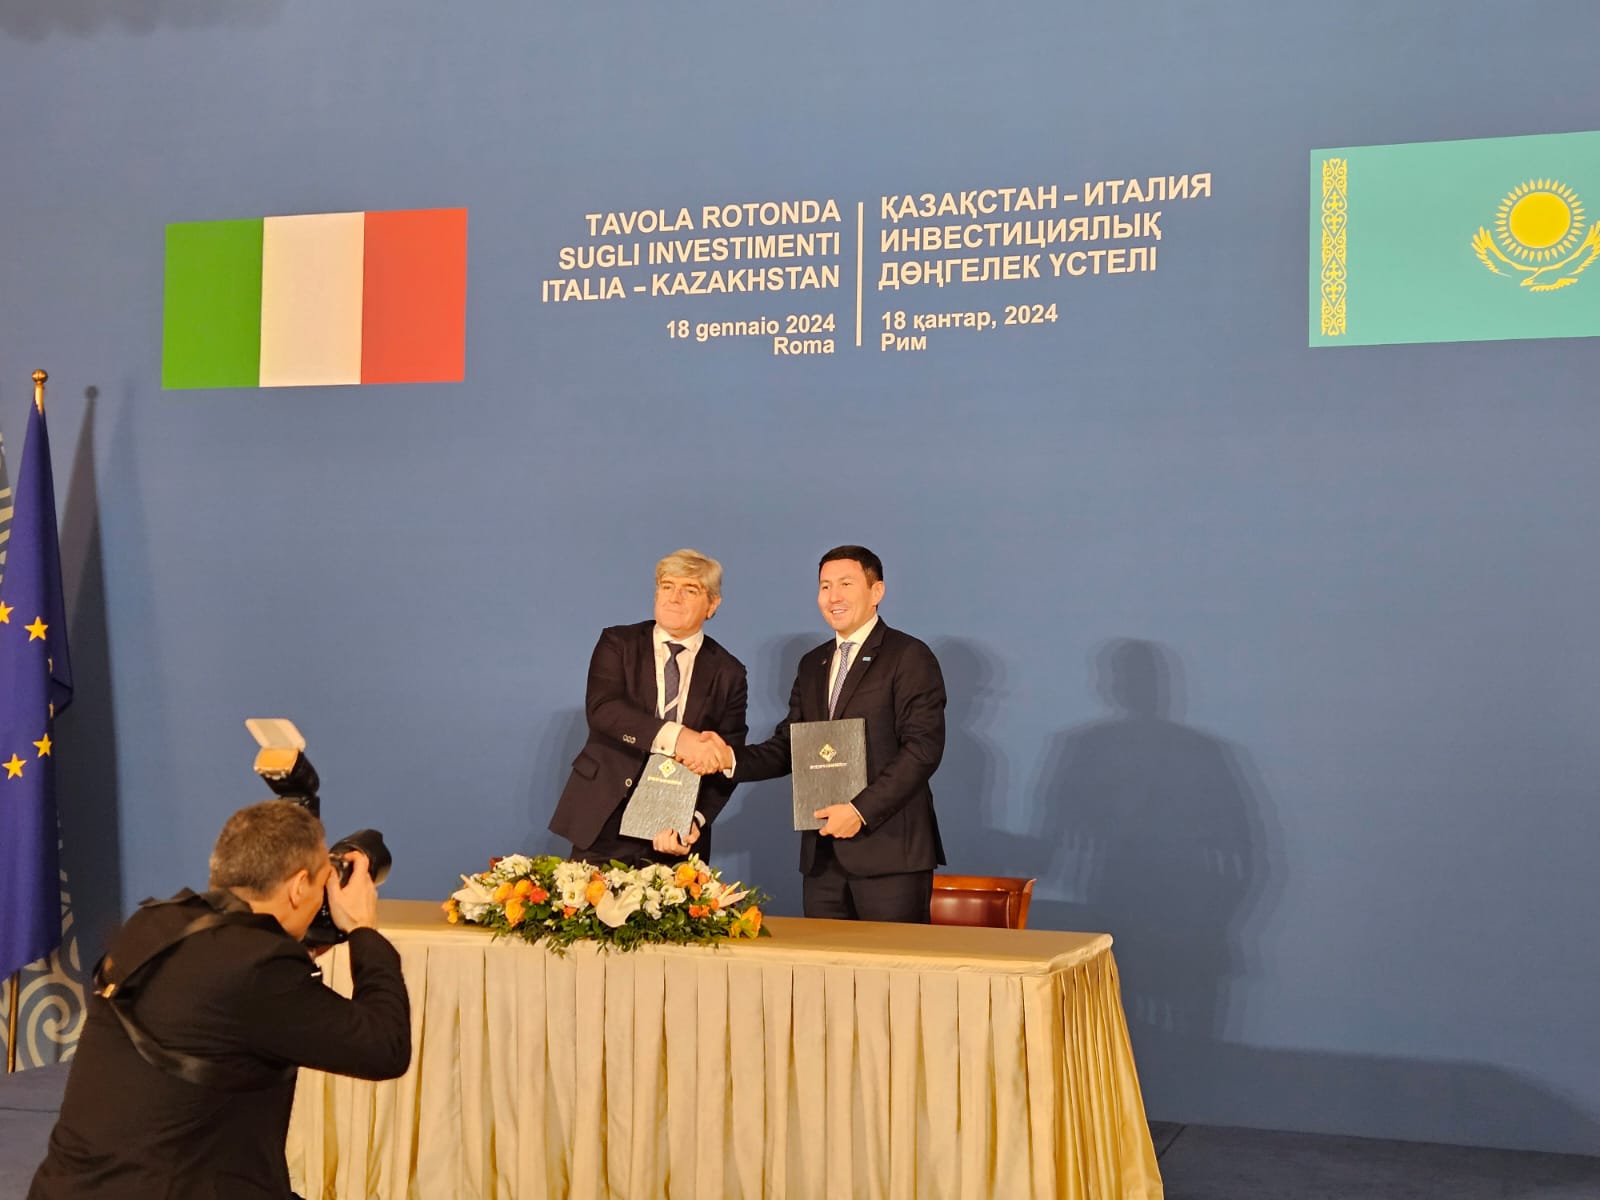 MAIRE and Kazakistan: to cooperate on energy transition initiatives